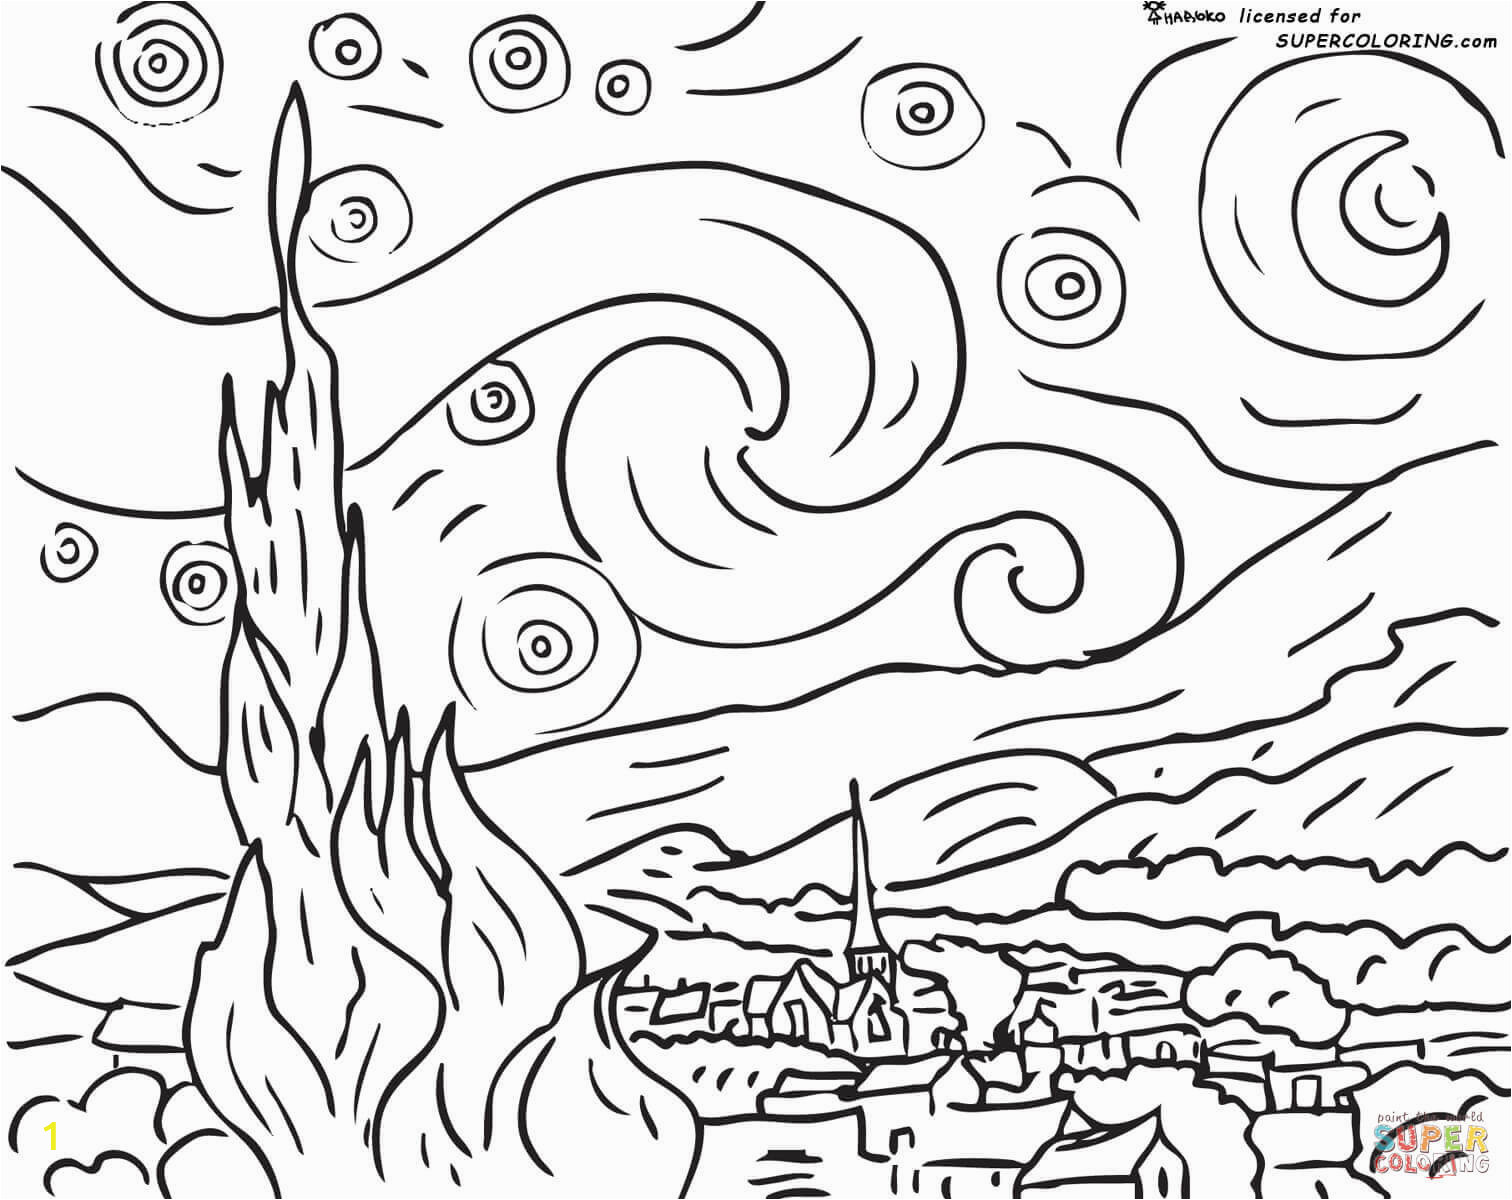 Vincent Van Gogh Starry Night Coloring Page Starry Night by Vincent Van Gogh Coloring Page